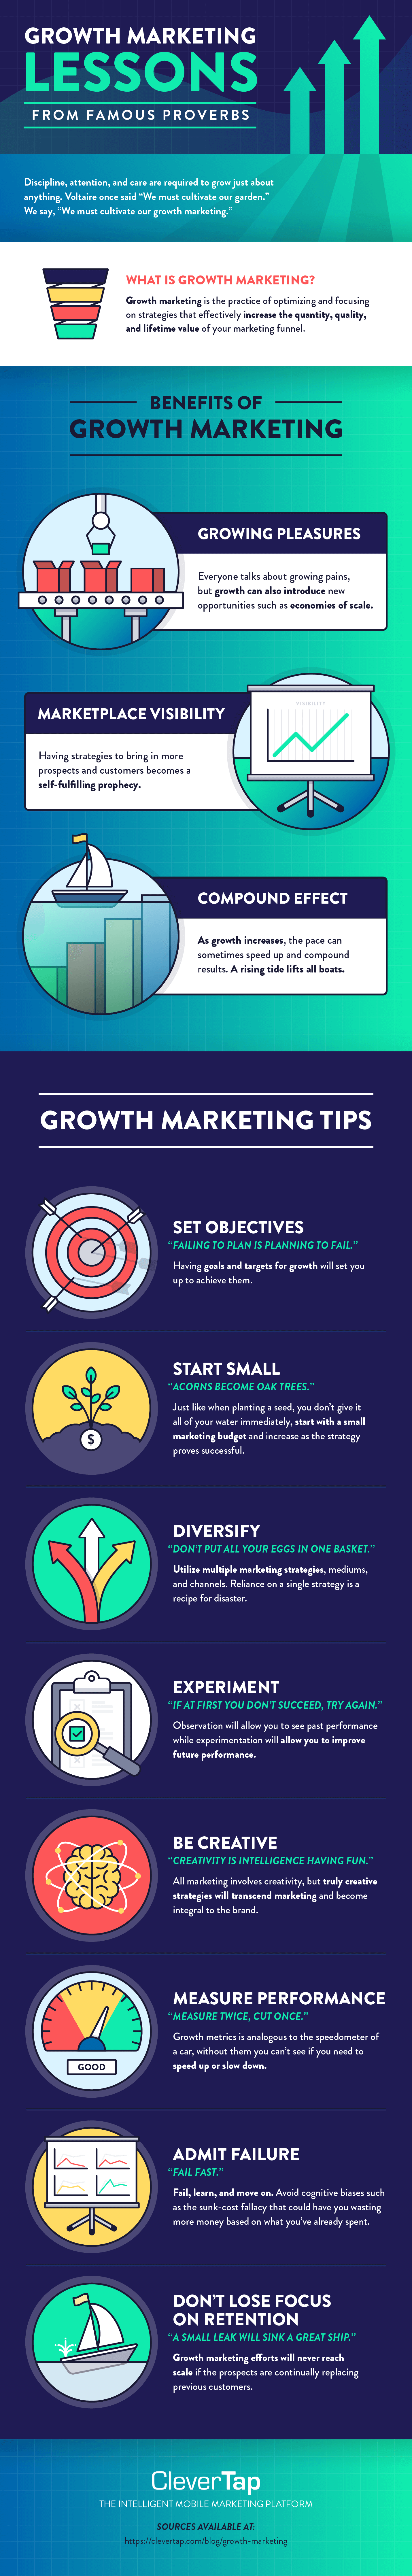 Growth marketing proverbs infographic